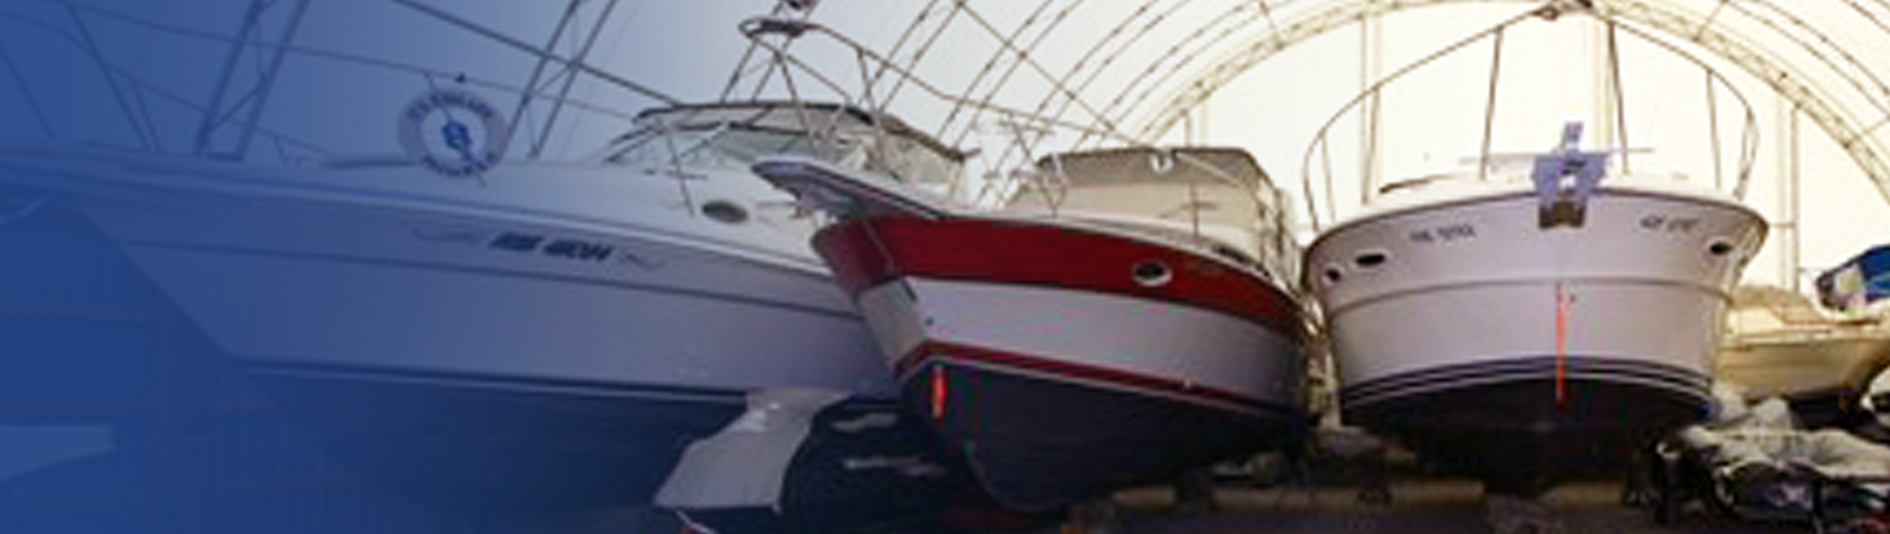 boat storage banner_with transparency